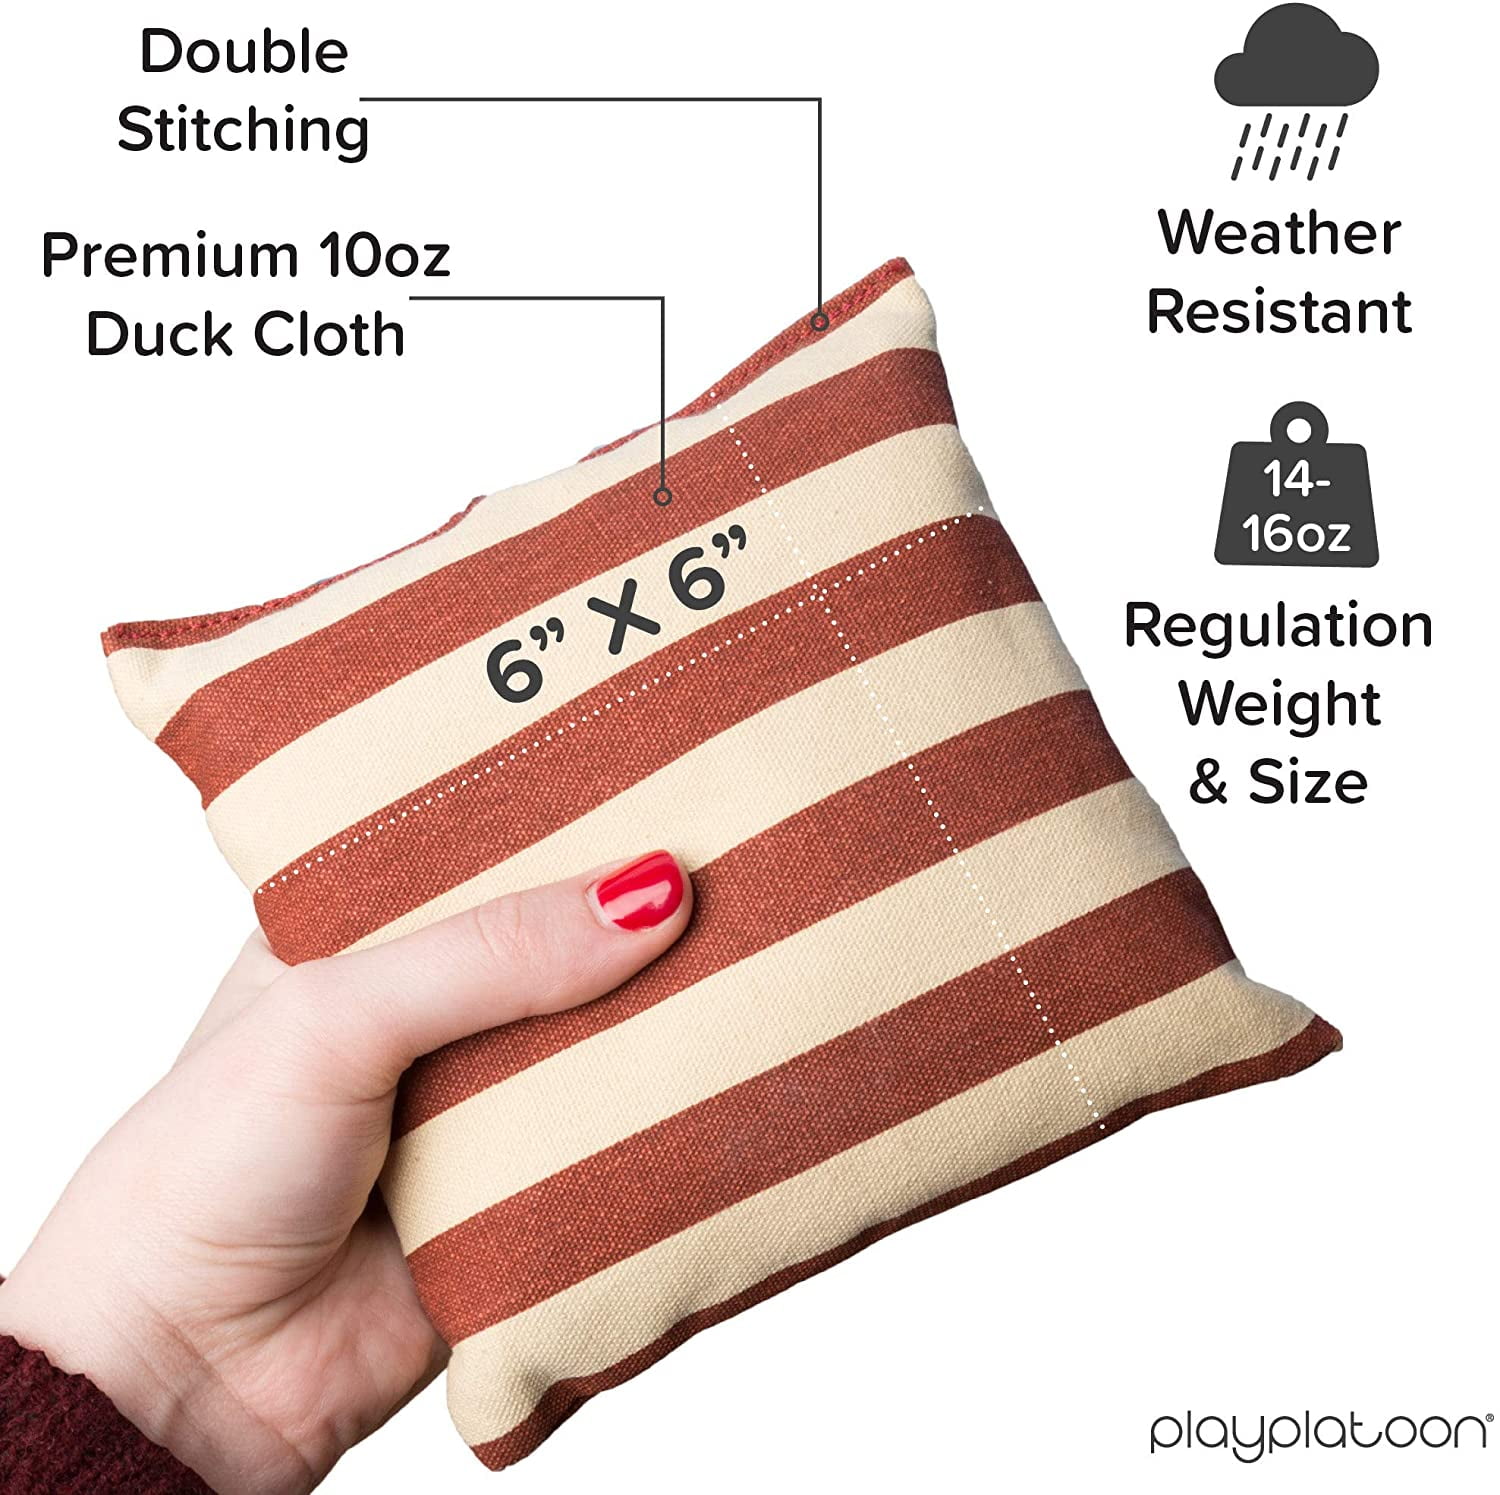 Regulation Size & Weight Set of 8 Bean Bags for Corn Hole Game Play Platoon Premium Weather Resistant Duckcloth Cornhole Bags 